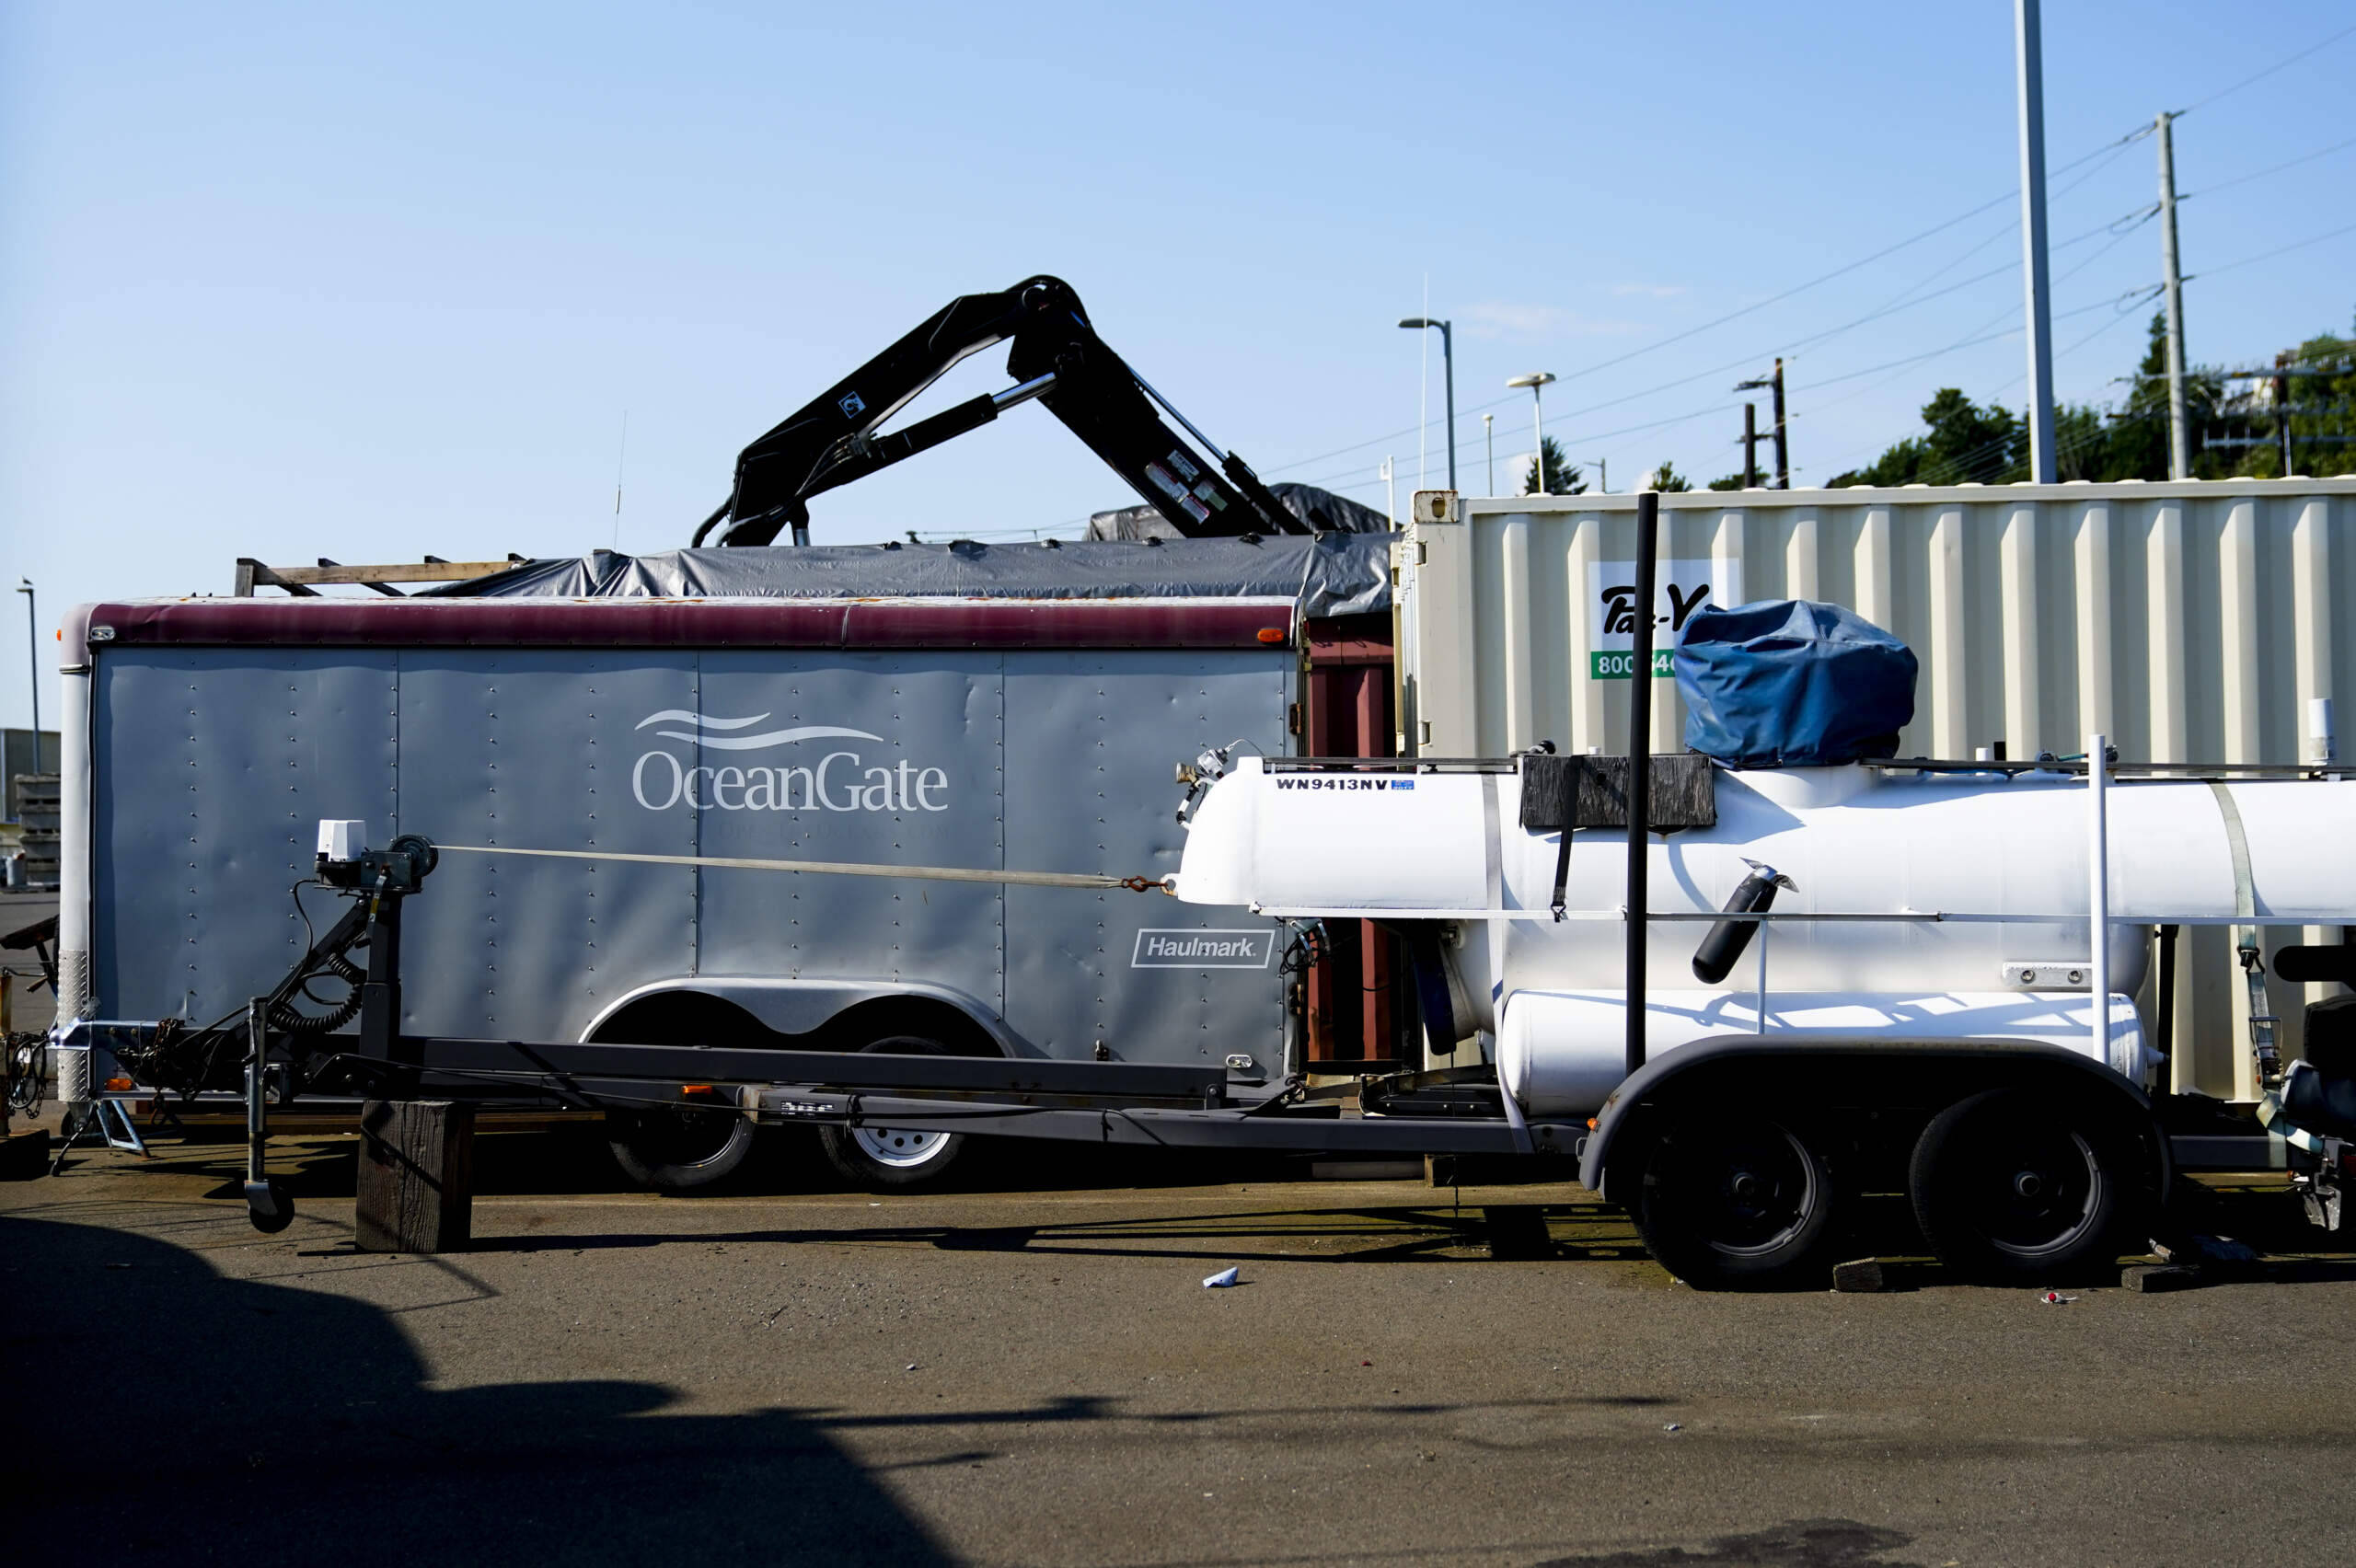 Equipment with the OceanGate logo is parked on a lot near the OceanGate offices Thursday, June 22, 2023, in Everett, Wash. The U.S. Coast Guard said Thursday that the missing submersible Titan imploded near the Titanic shipwreck site, killing everyone on board. (Lindsey Wasson/AP)